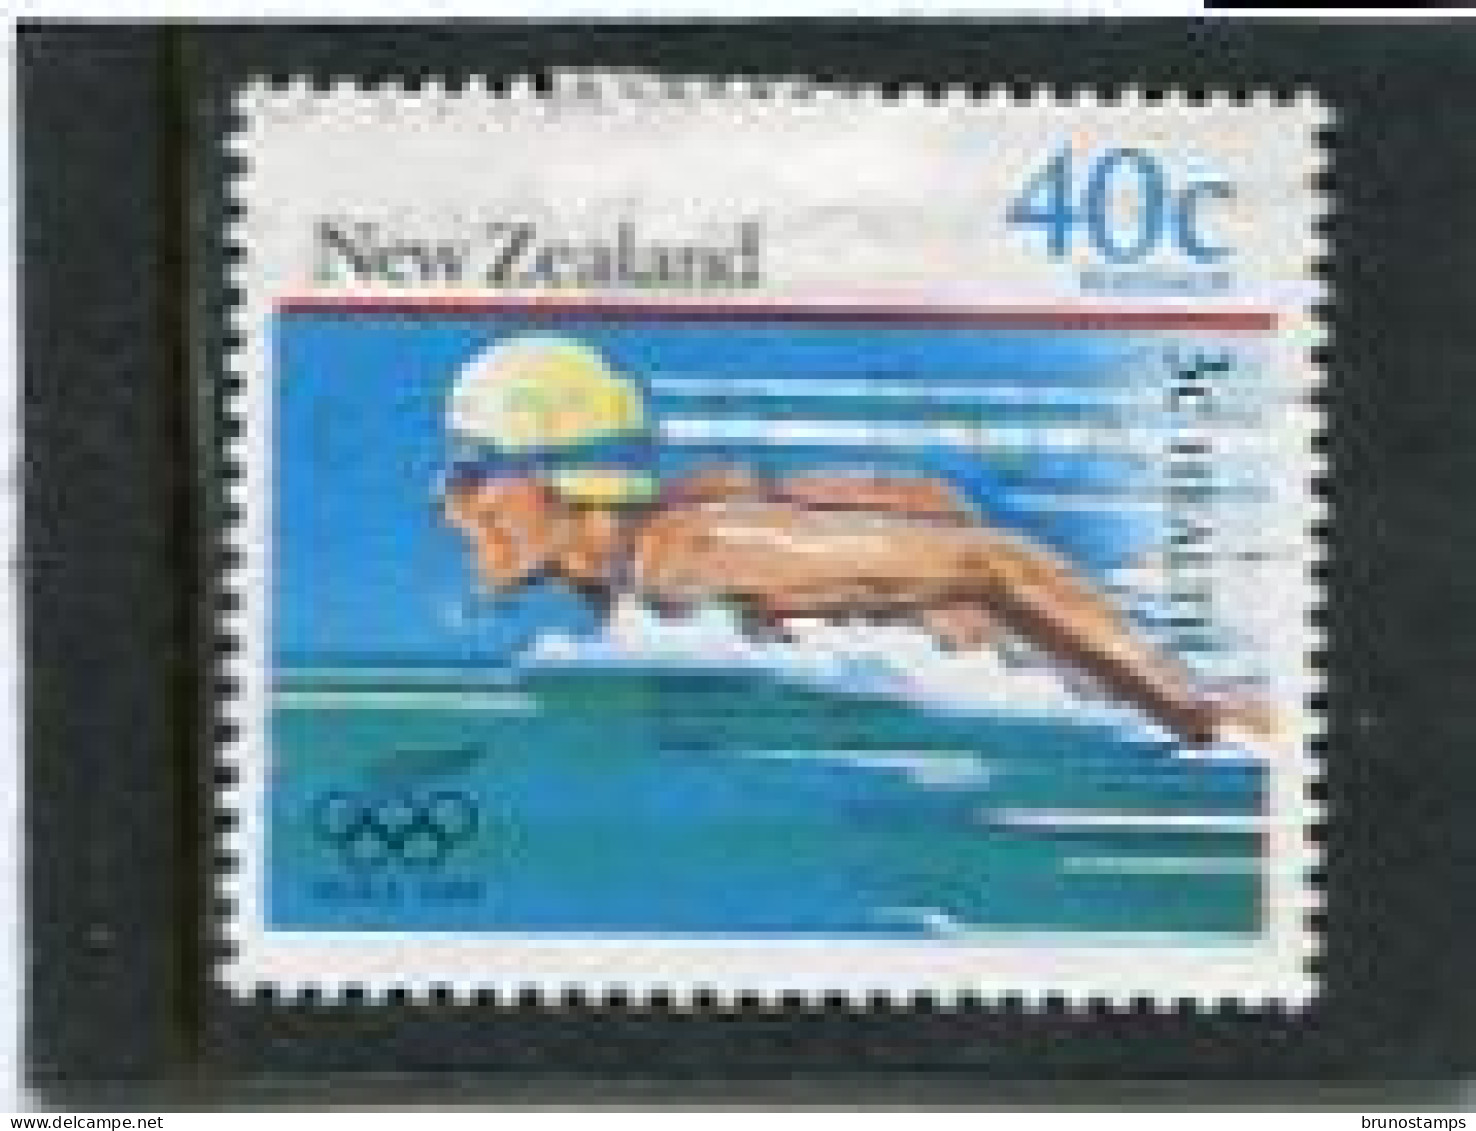 NEW ZEALAND - 1988  40c+3c  SEUL '88  FINE USED - Used Stamps